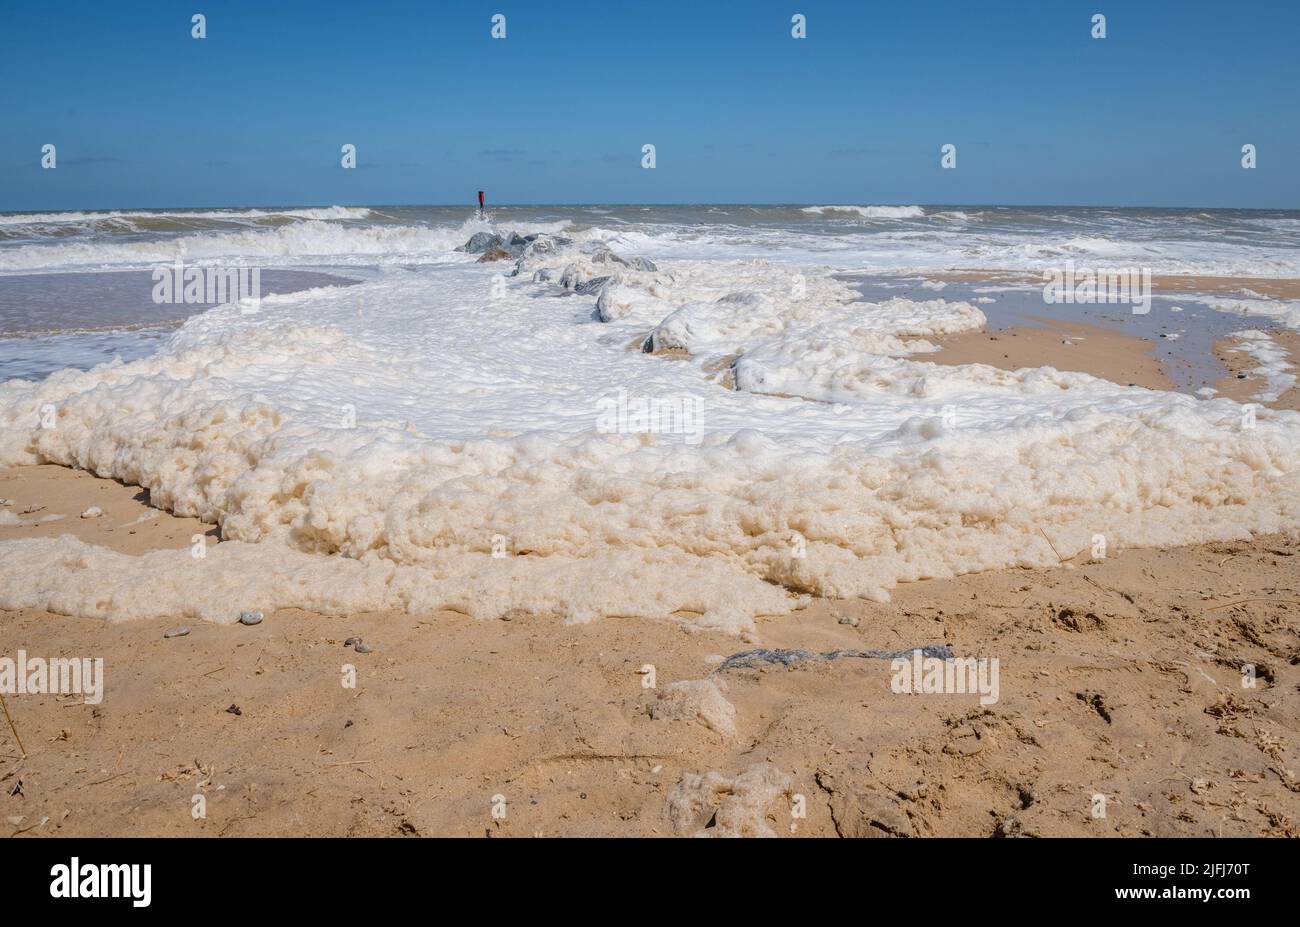 Sea foam, ocean foam, beach foam, or spume is a type of foam created by the agitation of seawater, on the beach at Horsey, Norfolk, England. Stock Photo